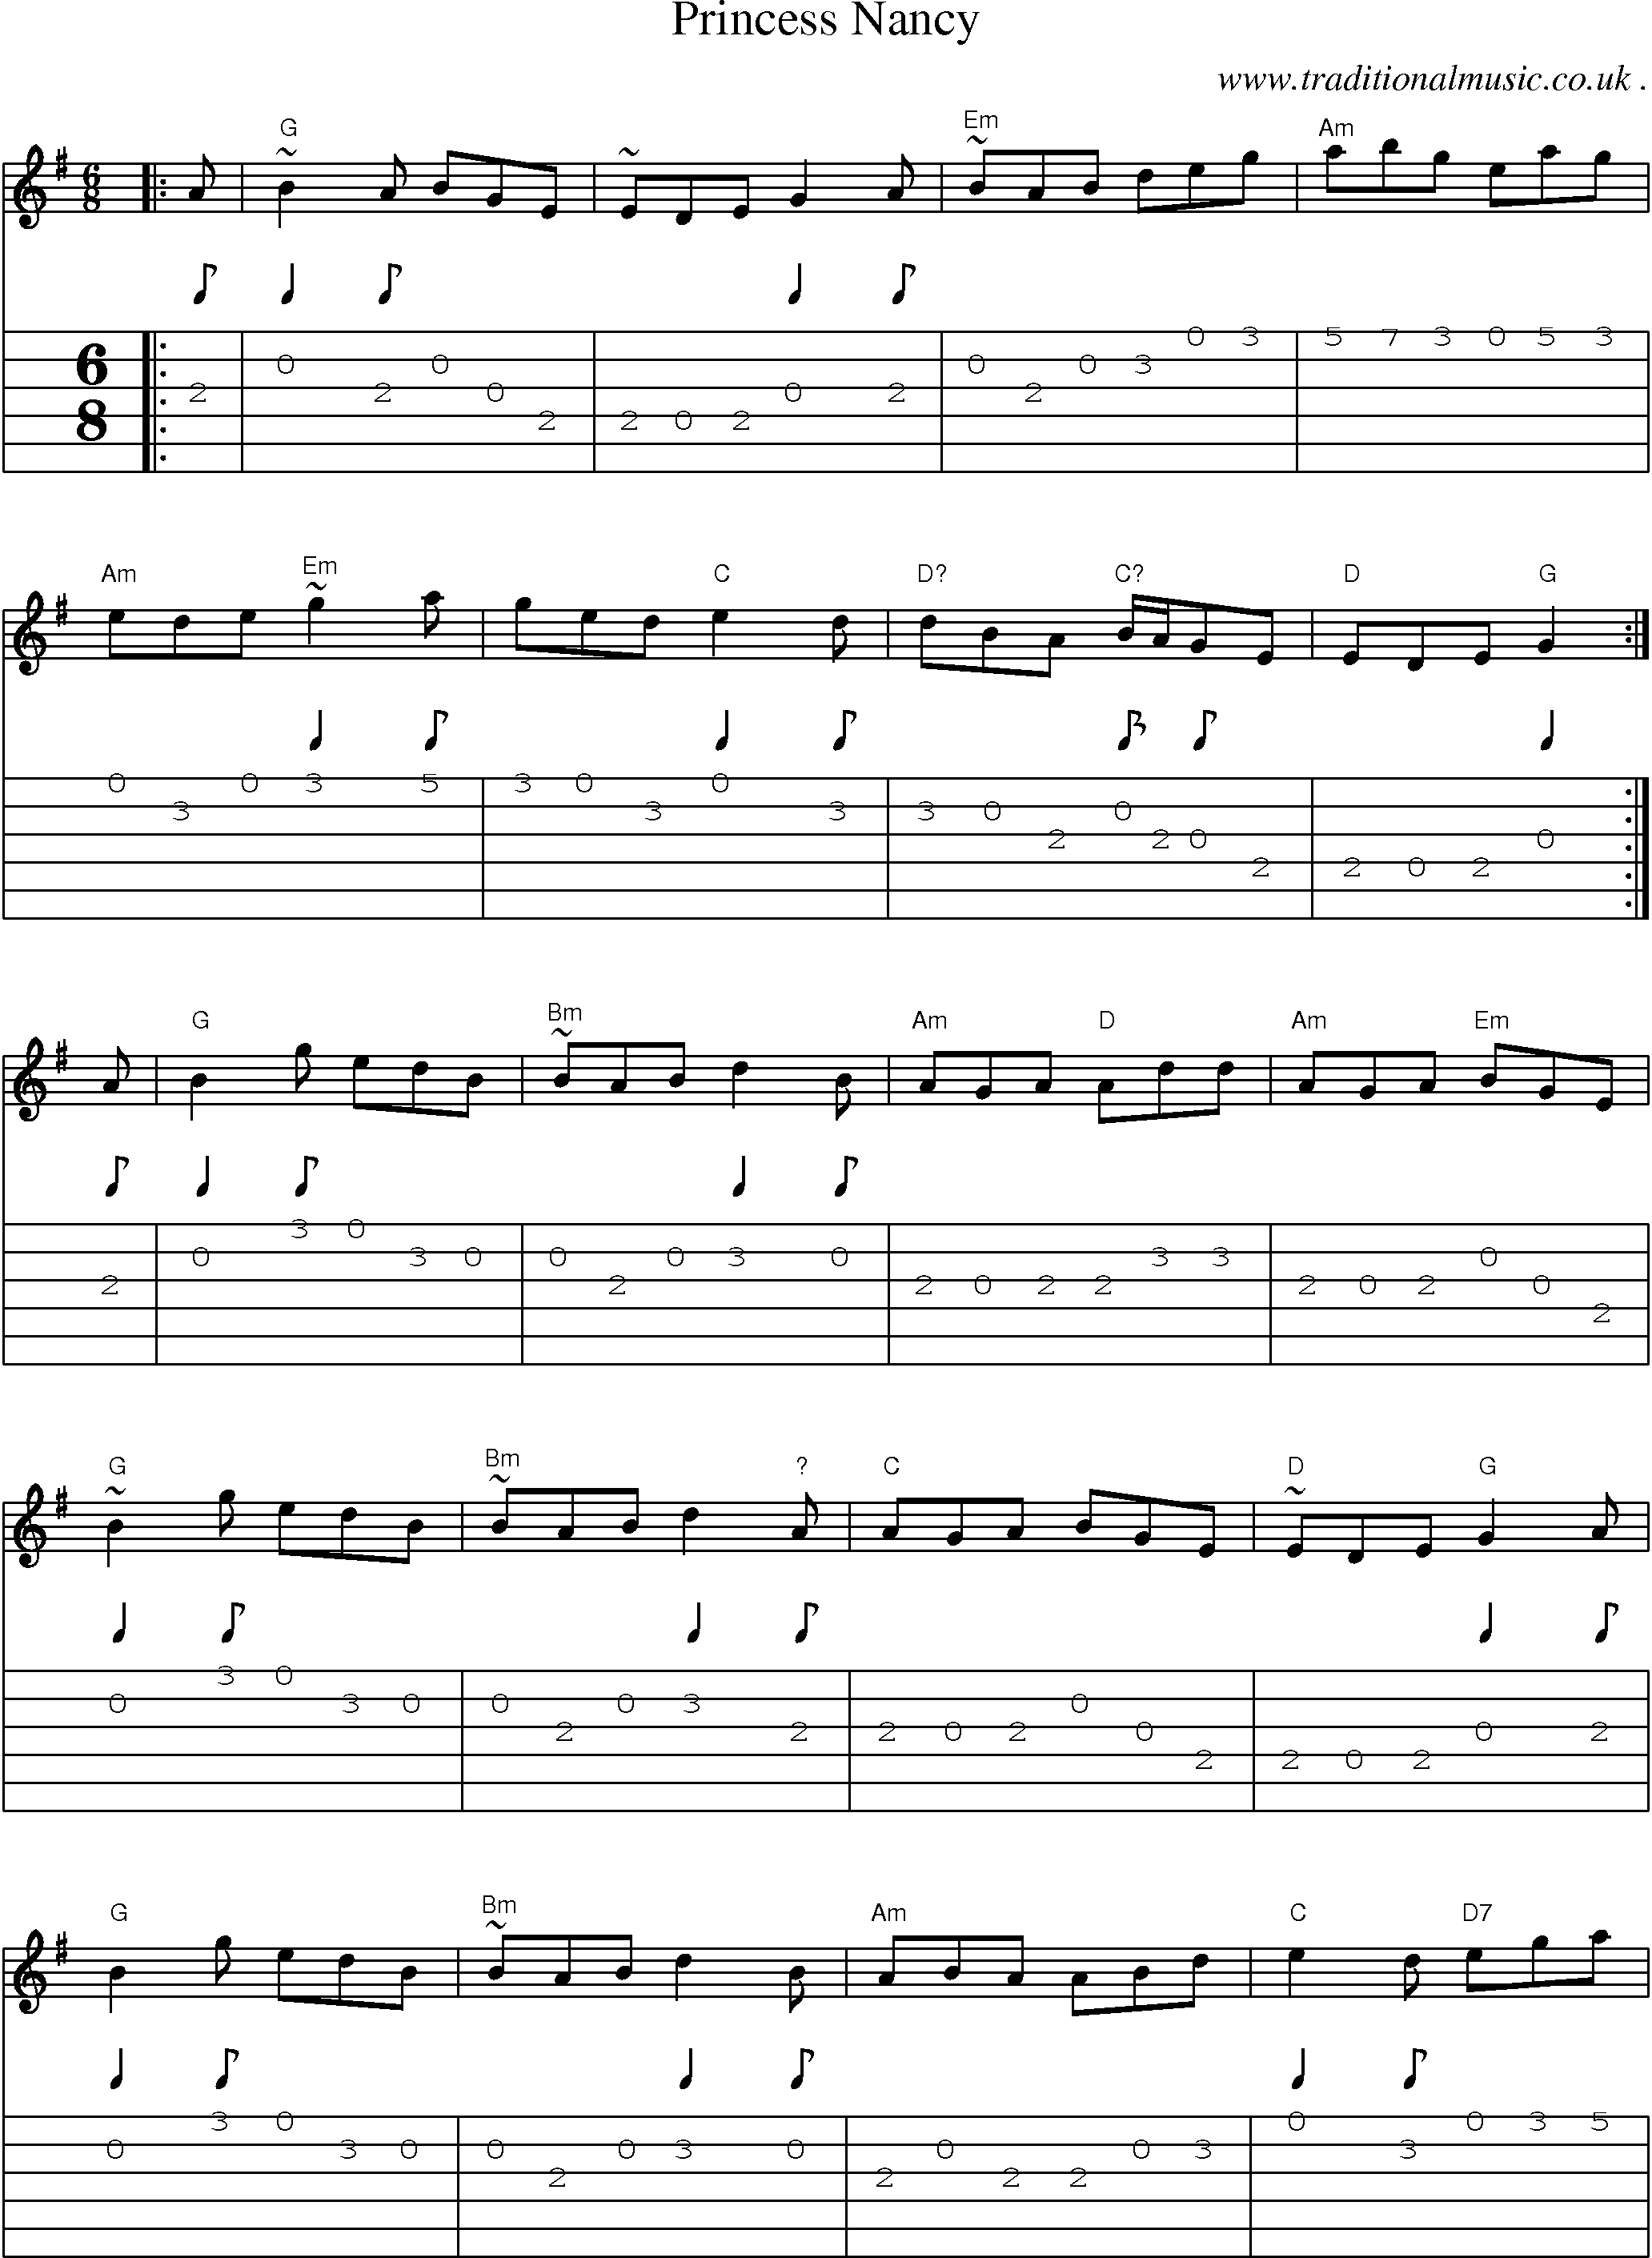 Music Score and Guitar Tabs for Princess Nancy